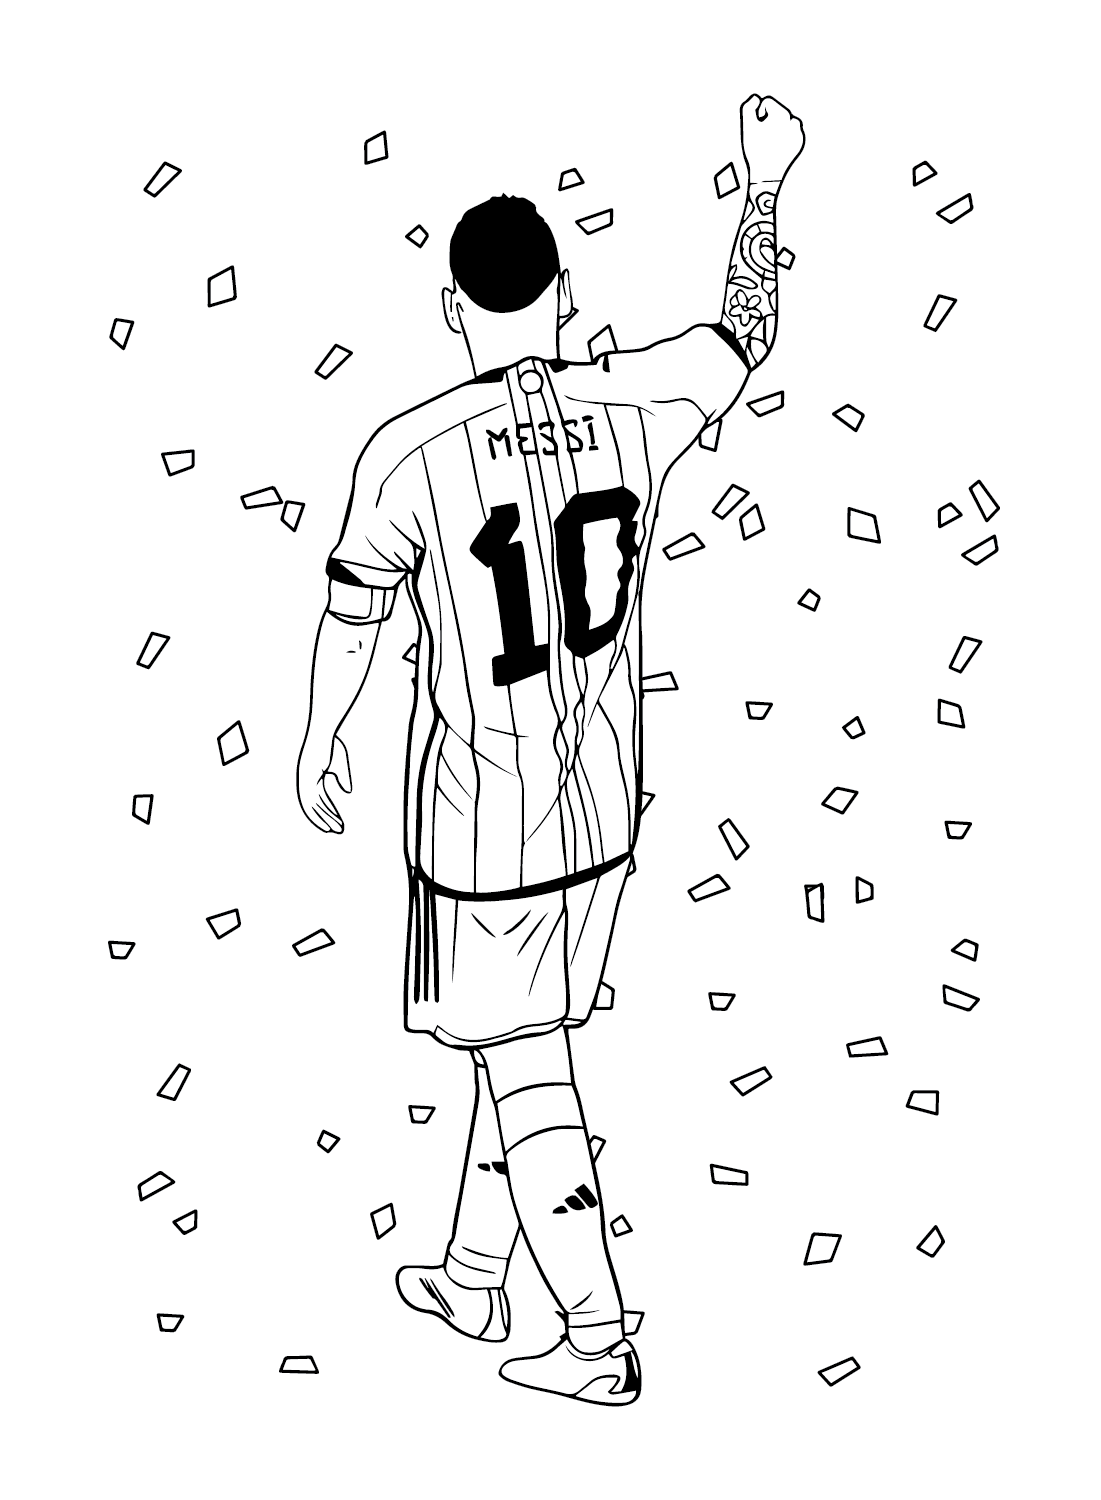 Messi can Color Coloring Page - Free Printable Coloring Pages